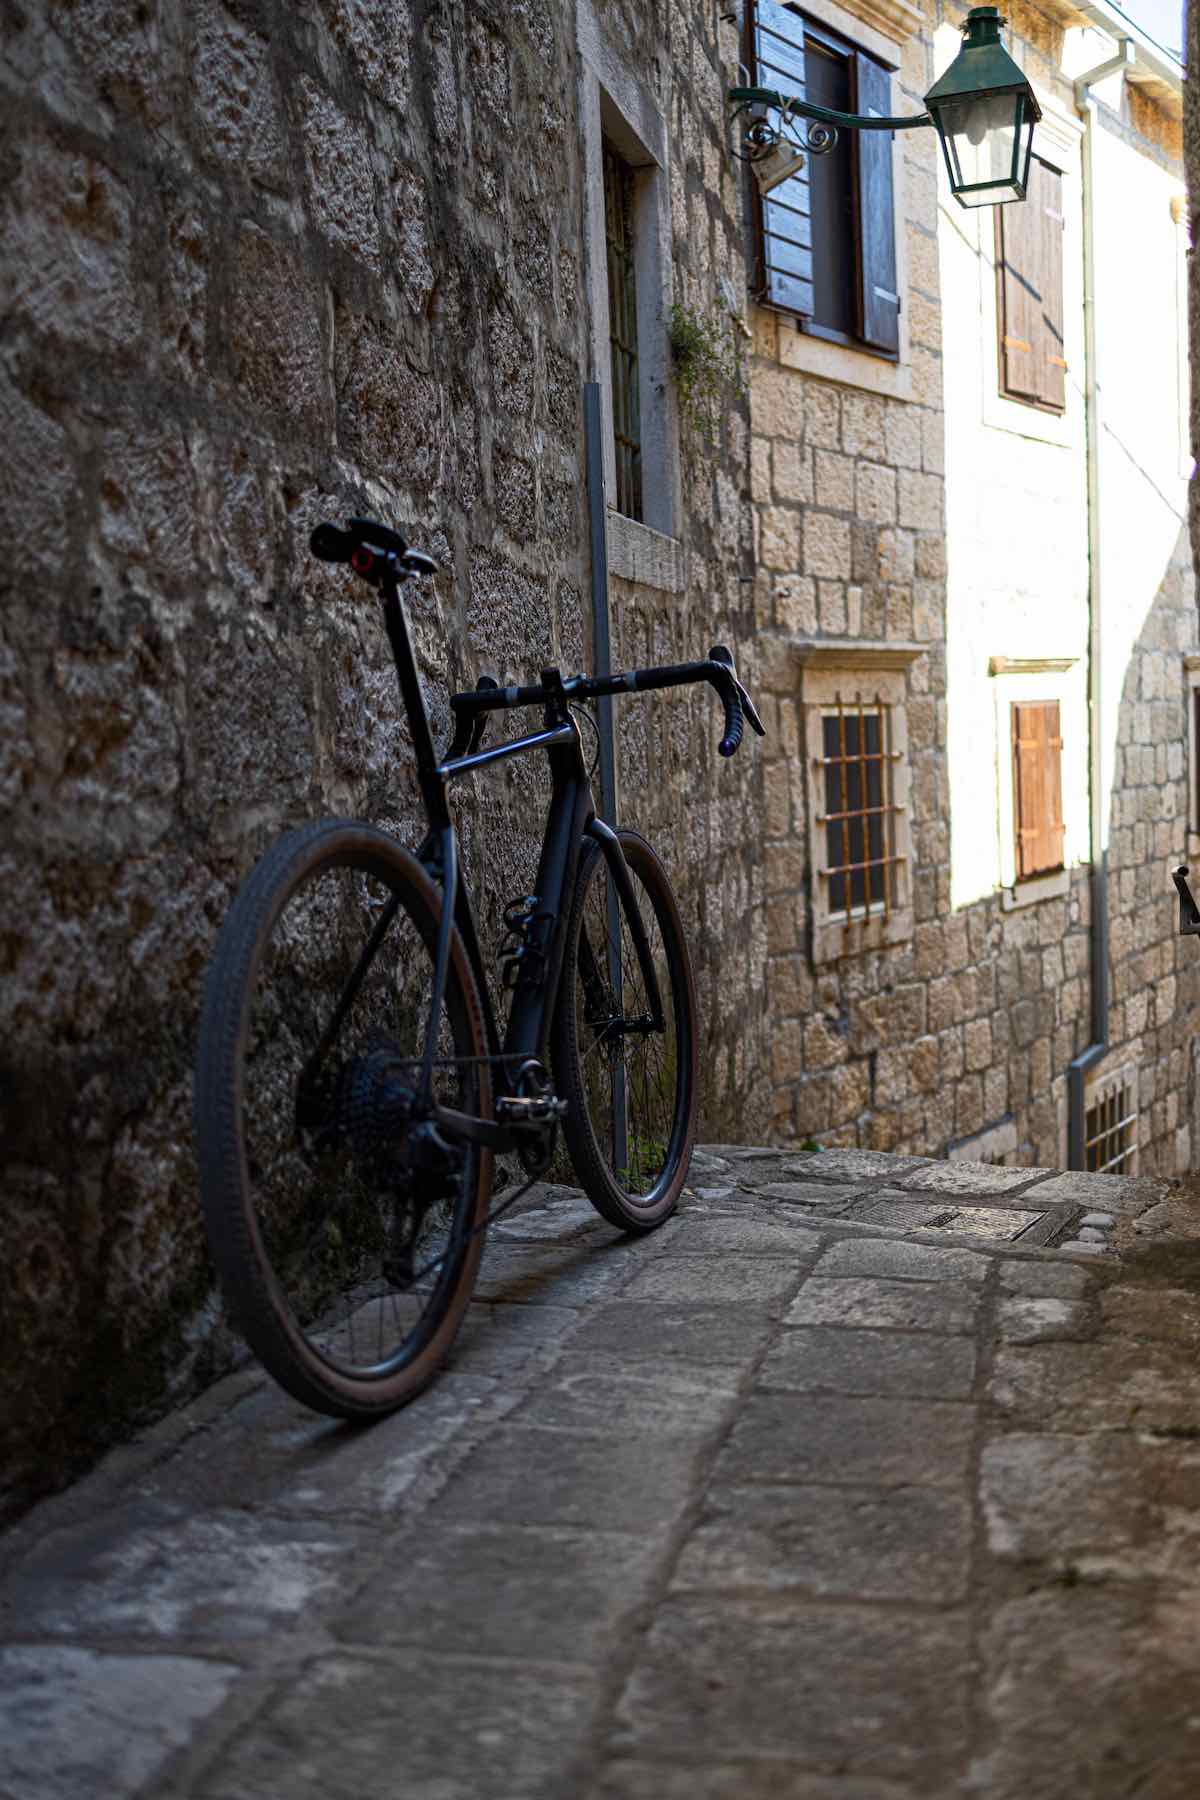 bikerumor pic of the day a road bike leans against a stone building in a narrow stone paved alley in croatia.